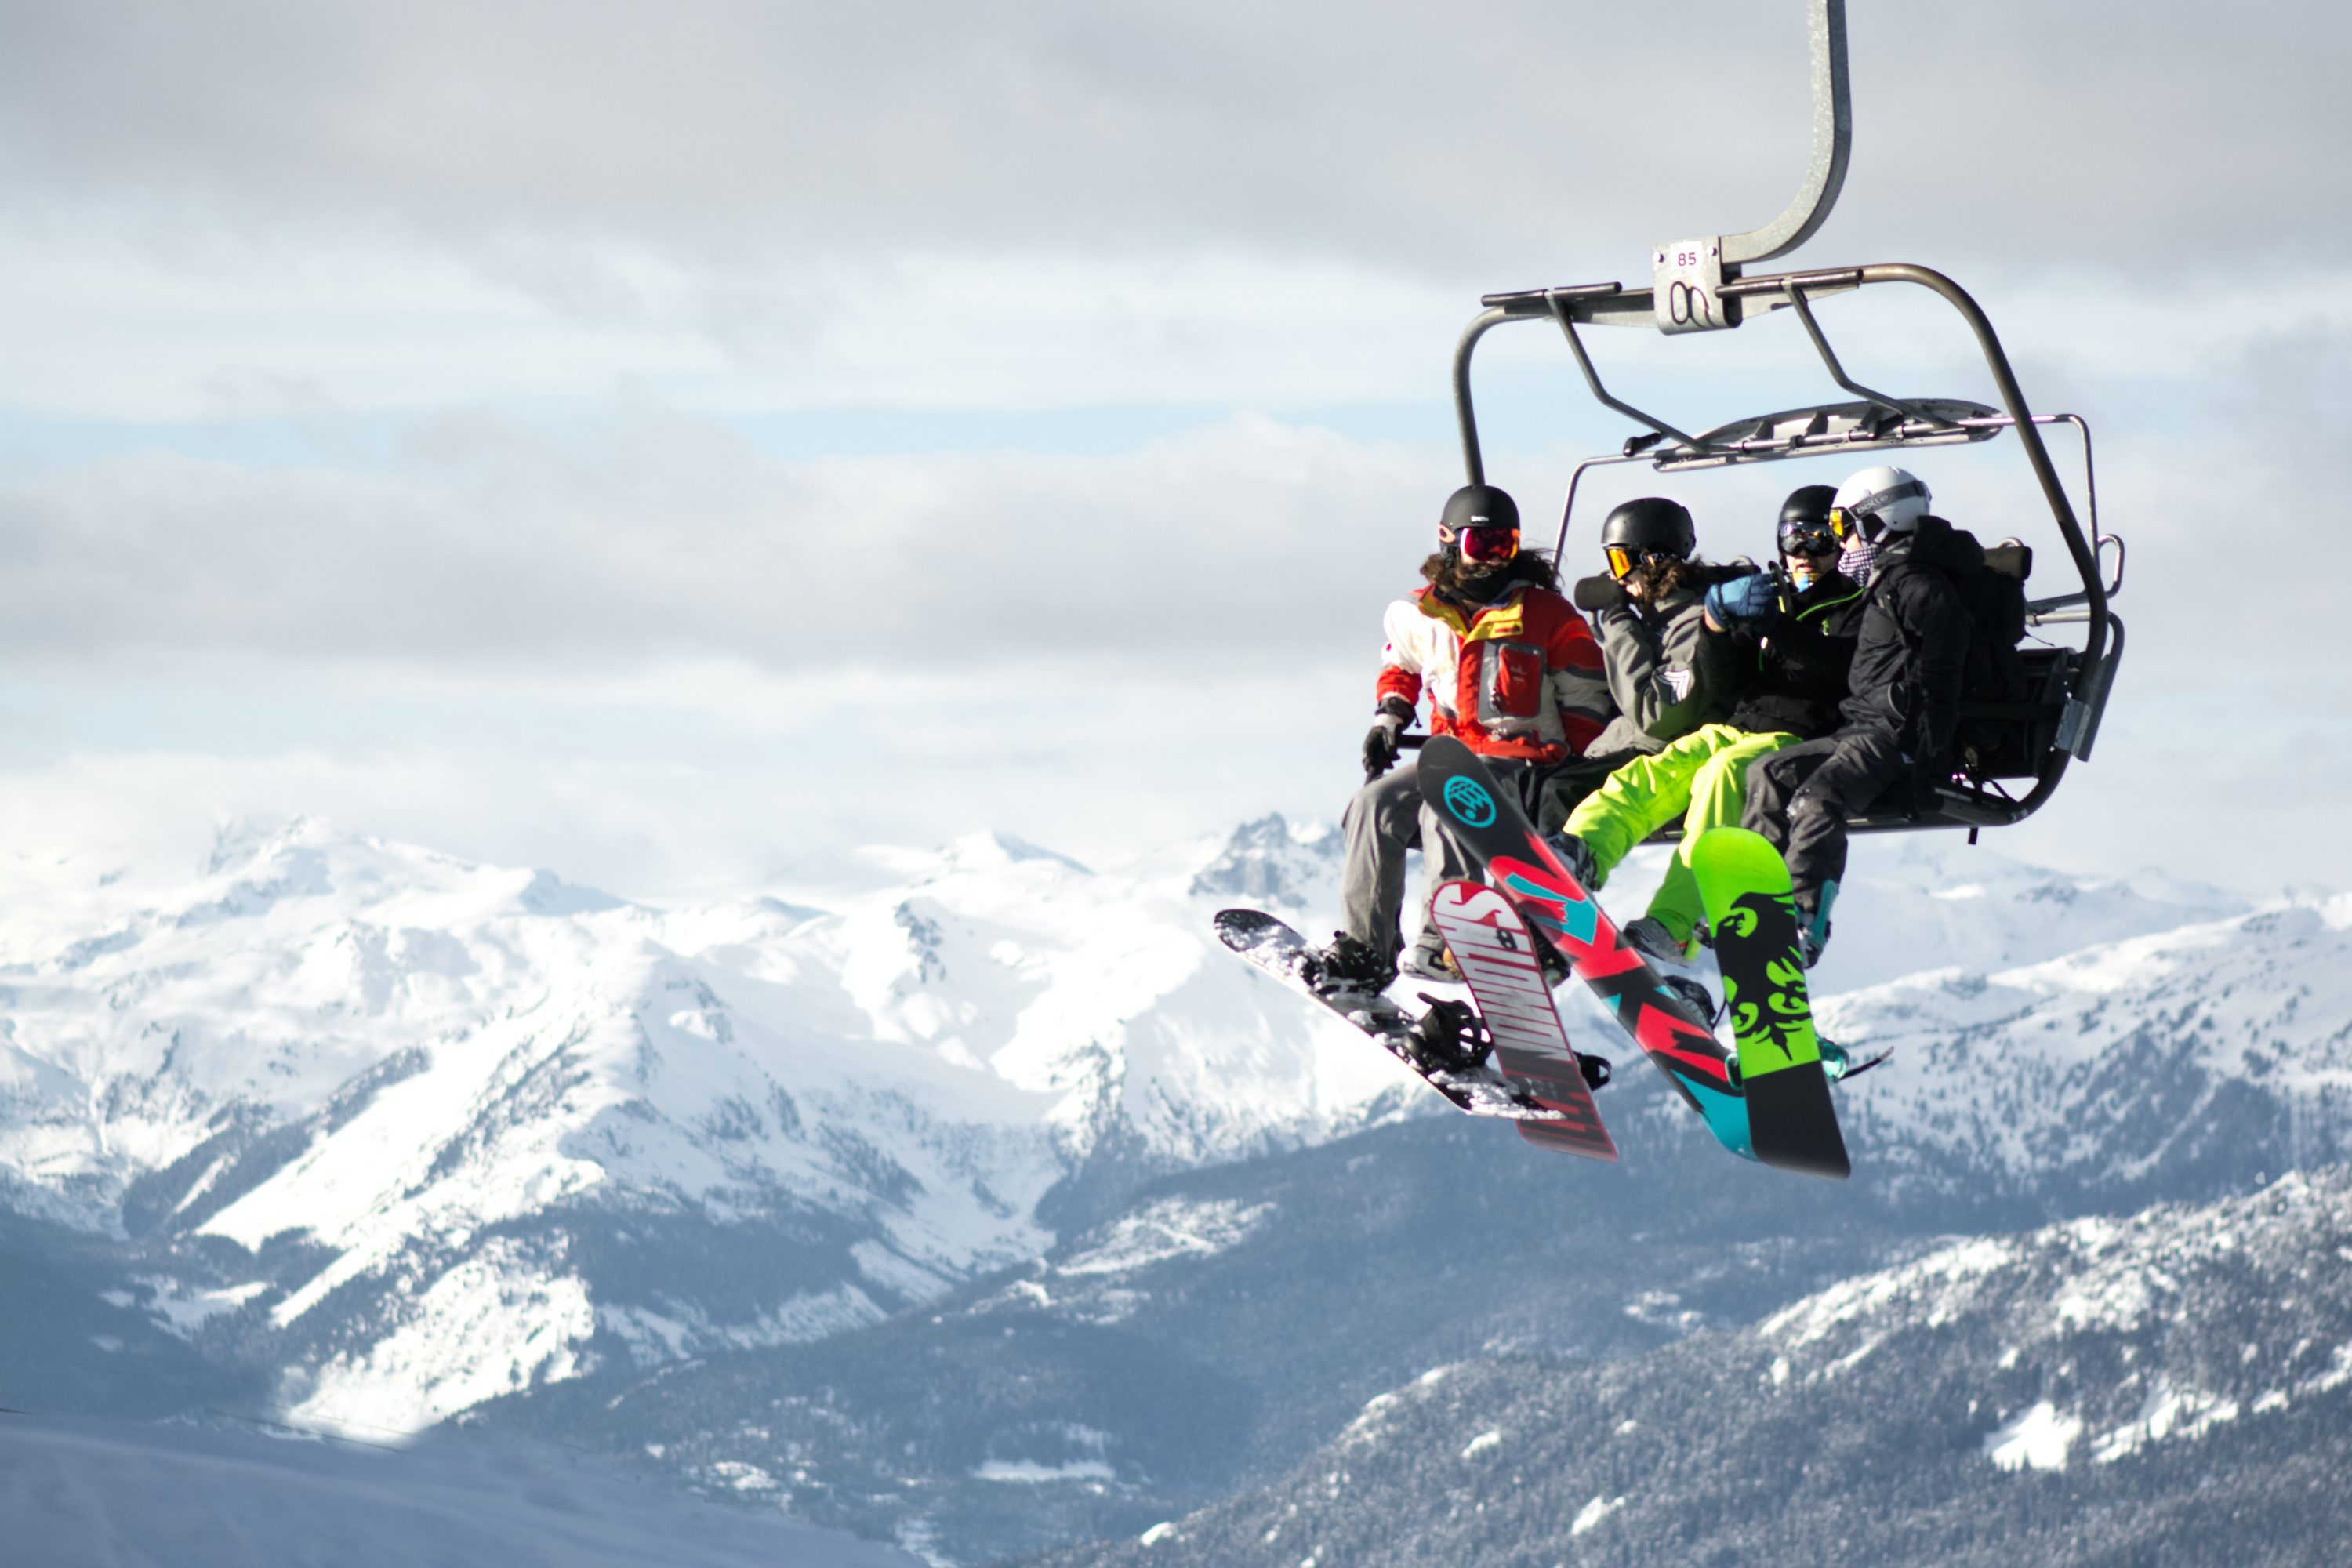 Snowboarders on chair lift